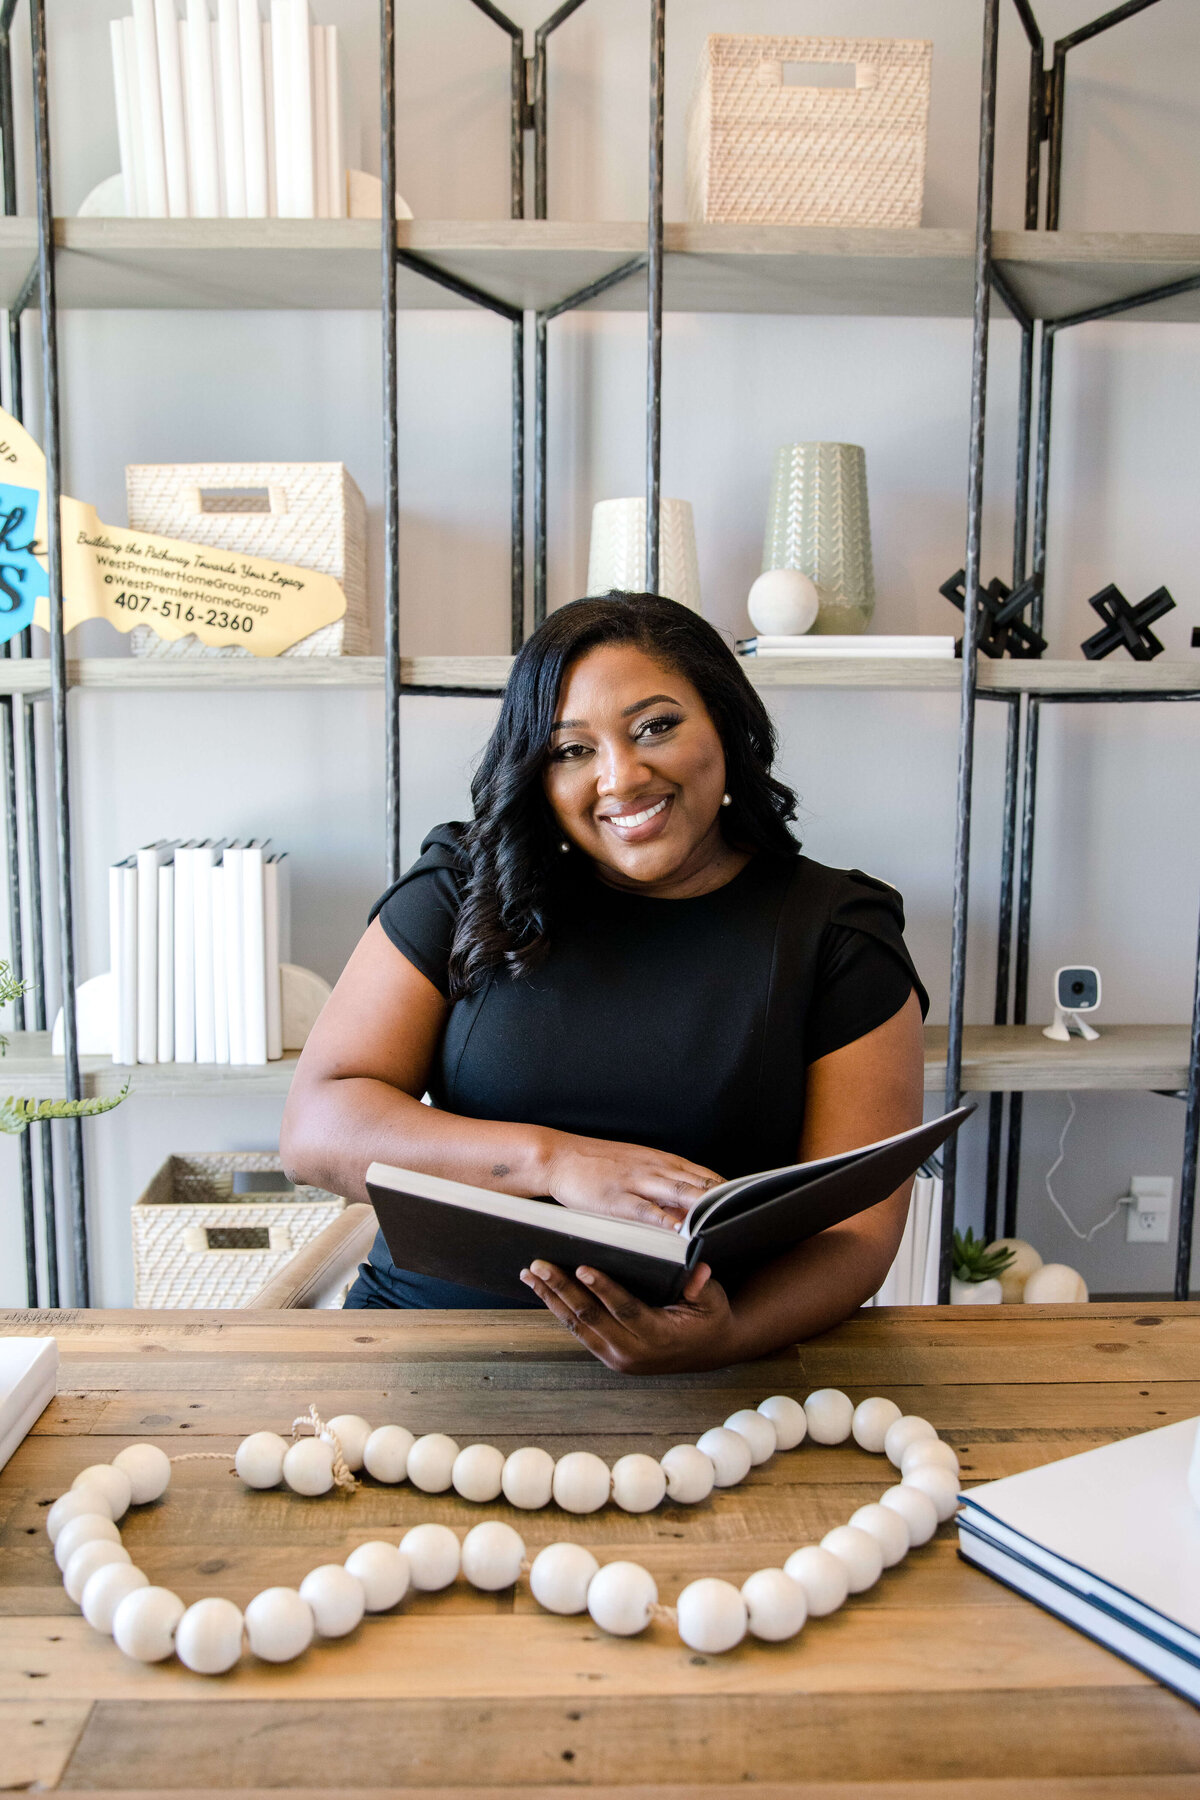 black owned business brand photography with woman sitting at a wooden desk and holding a portfolio with shelves behind her captured by commercial photographers